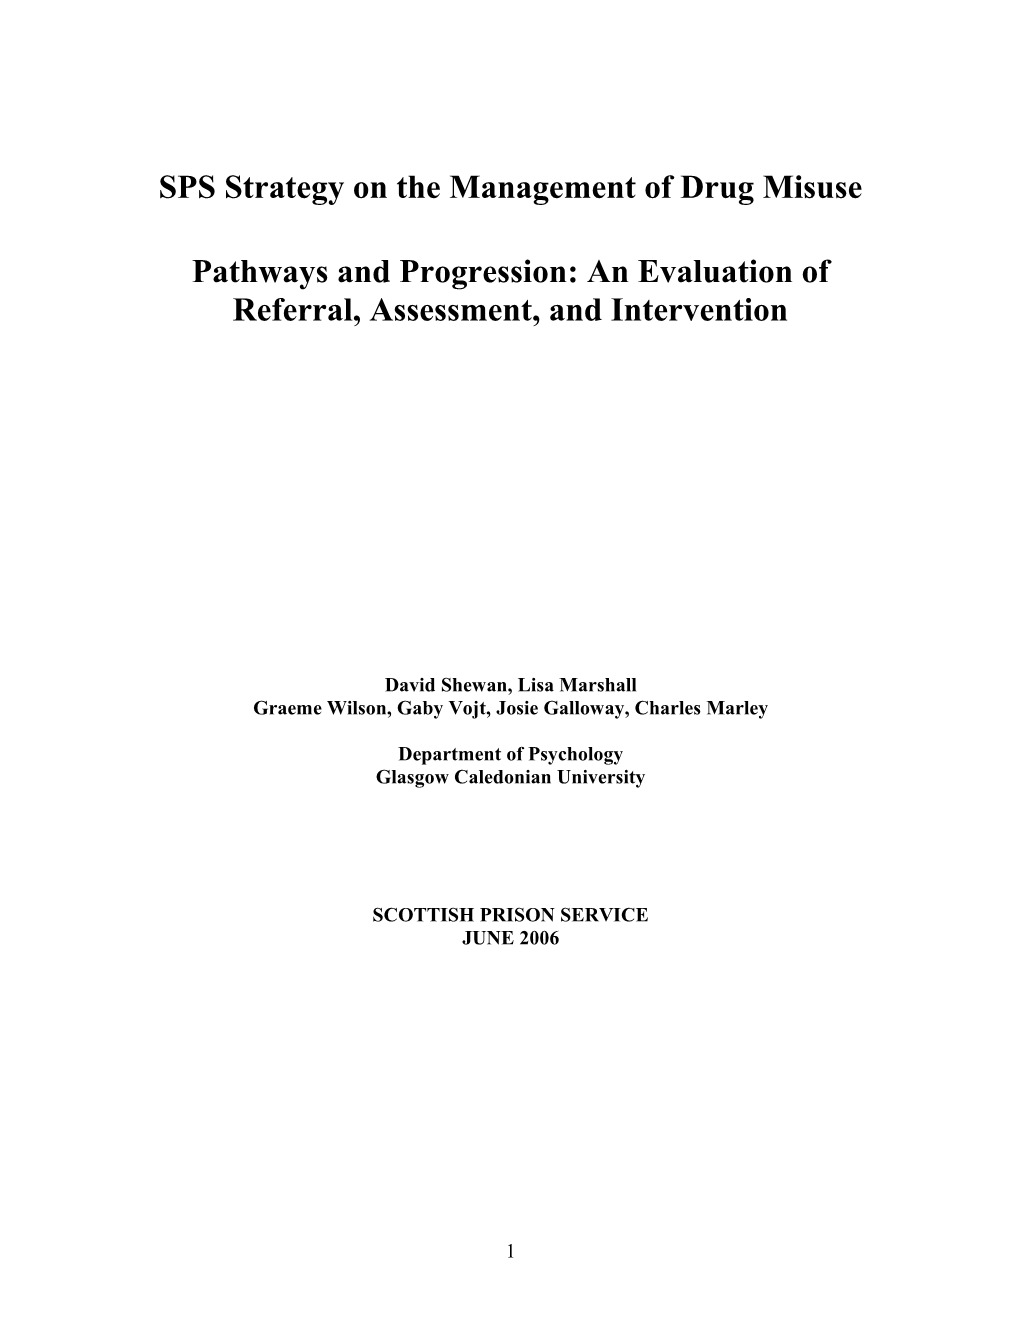 The Prevalence of Illegal Drug Use and Drug Related Problems in Prisons in a Number Of